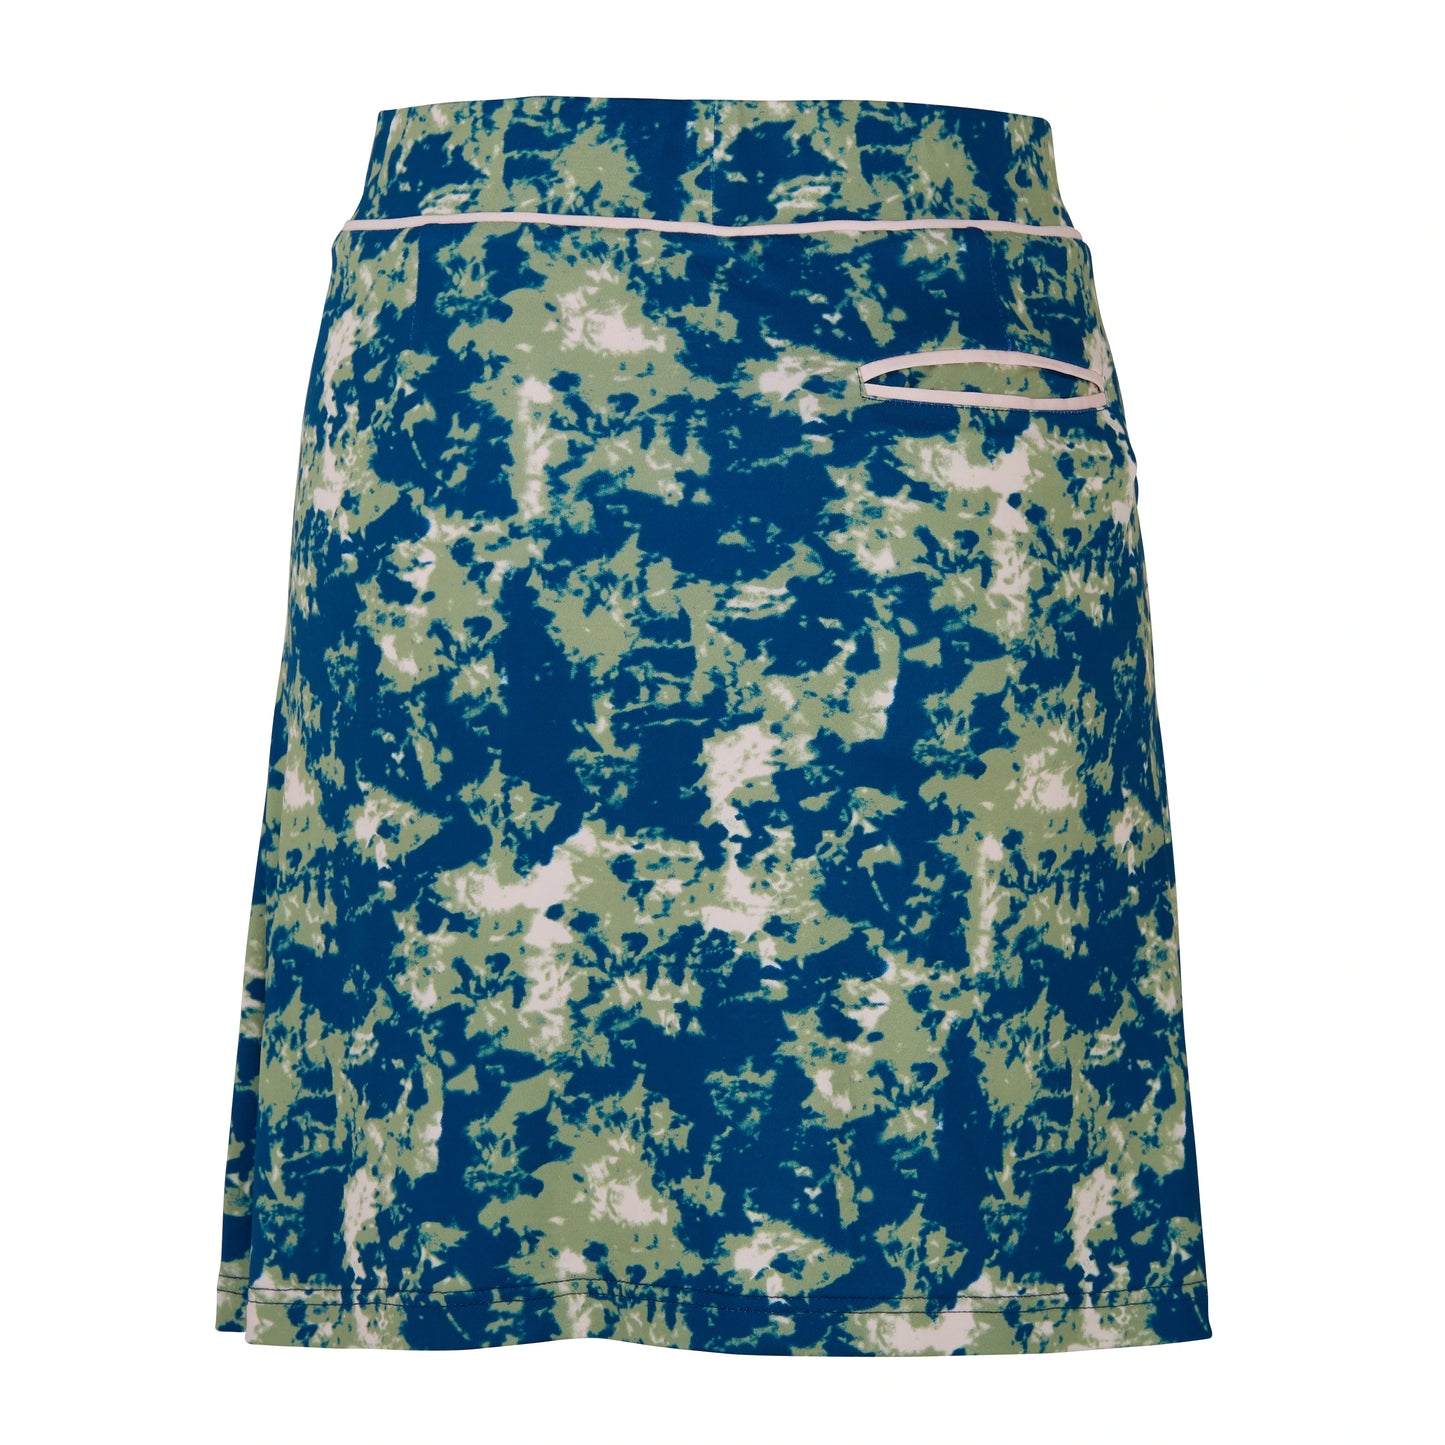 Swing Out Sister Genevieve Print Skort - Abstract